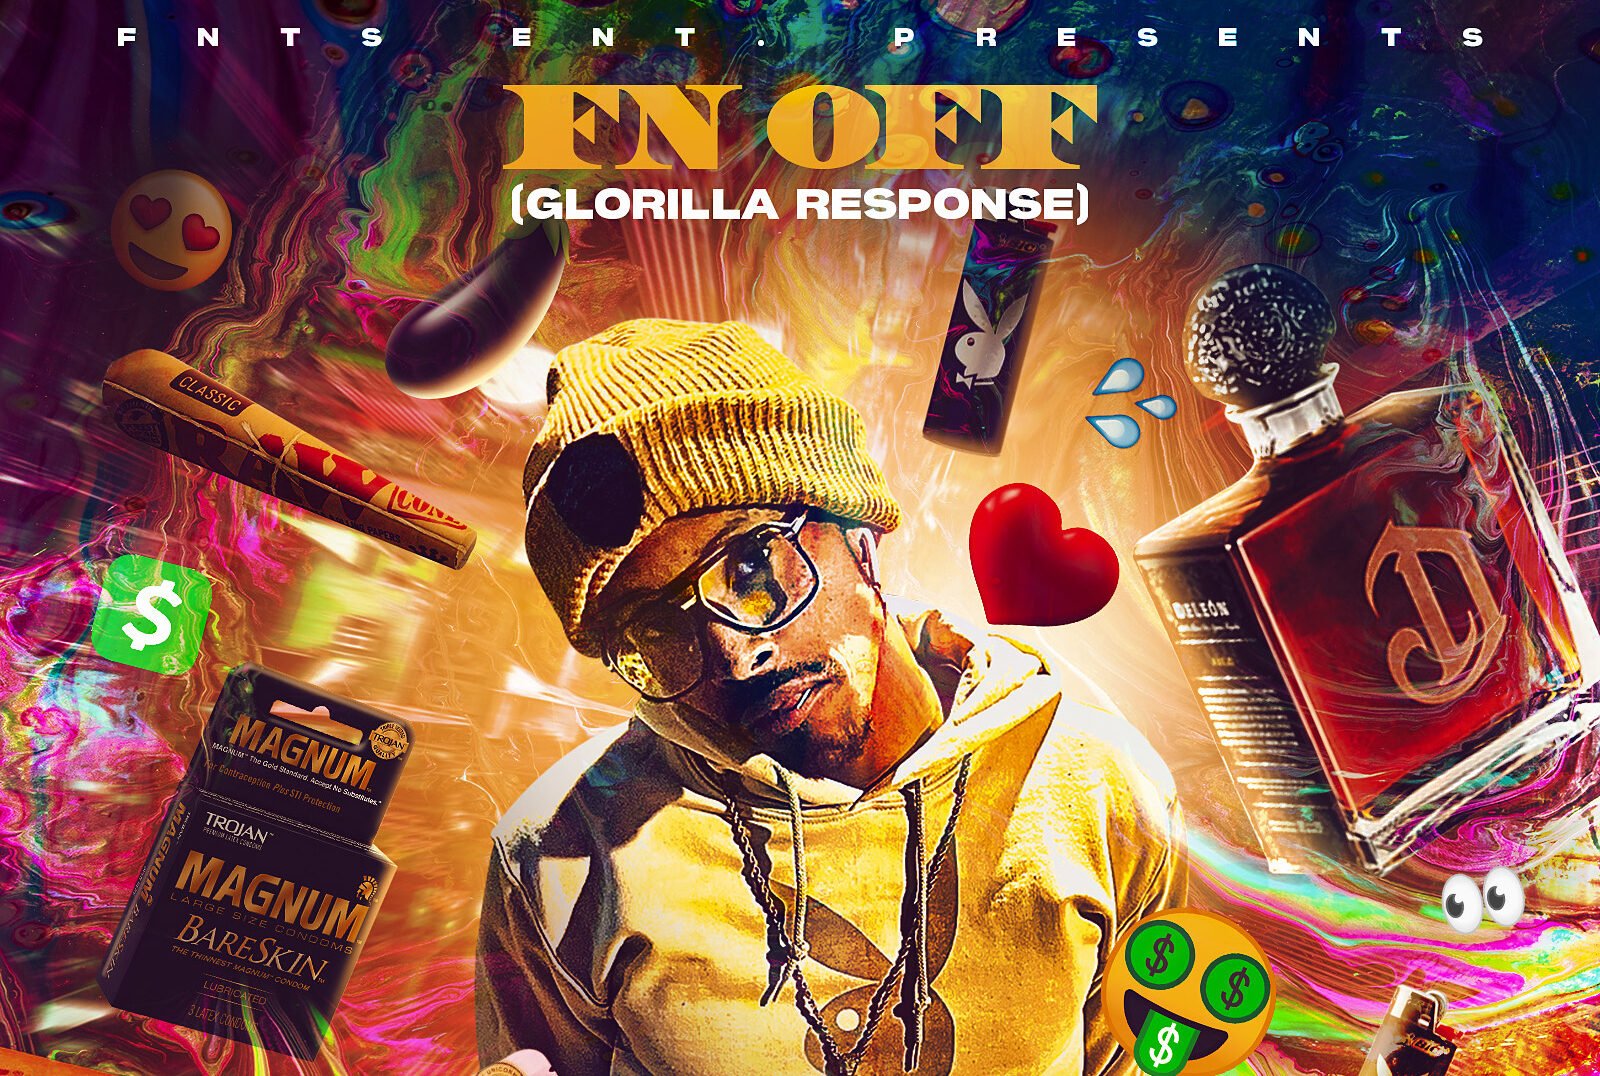 Glorilla Drops New Album “Anyways… Life’s Great” and Gets “Smoke” from Kirk B. With his new “F.N.F (Let’s Go) Response record (FN Off)